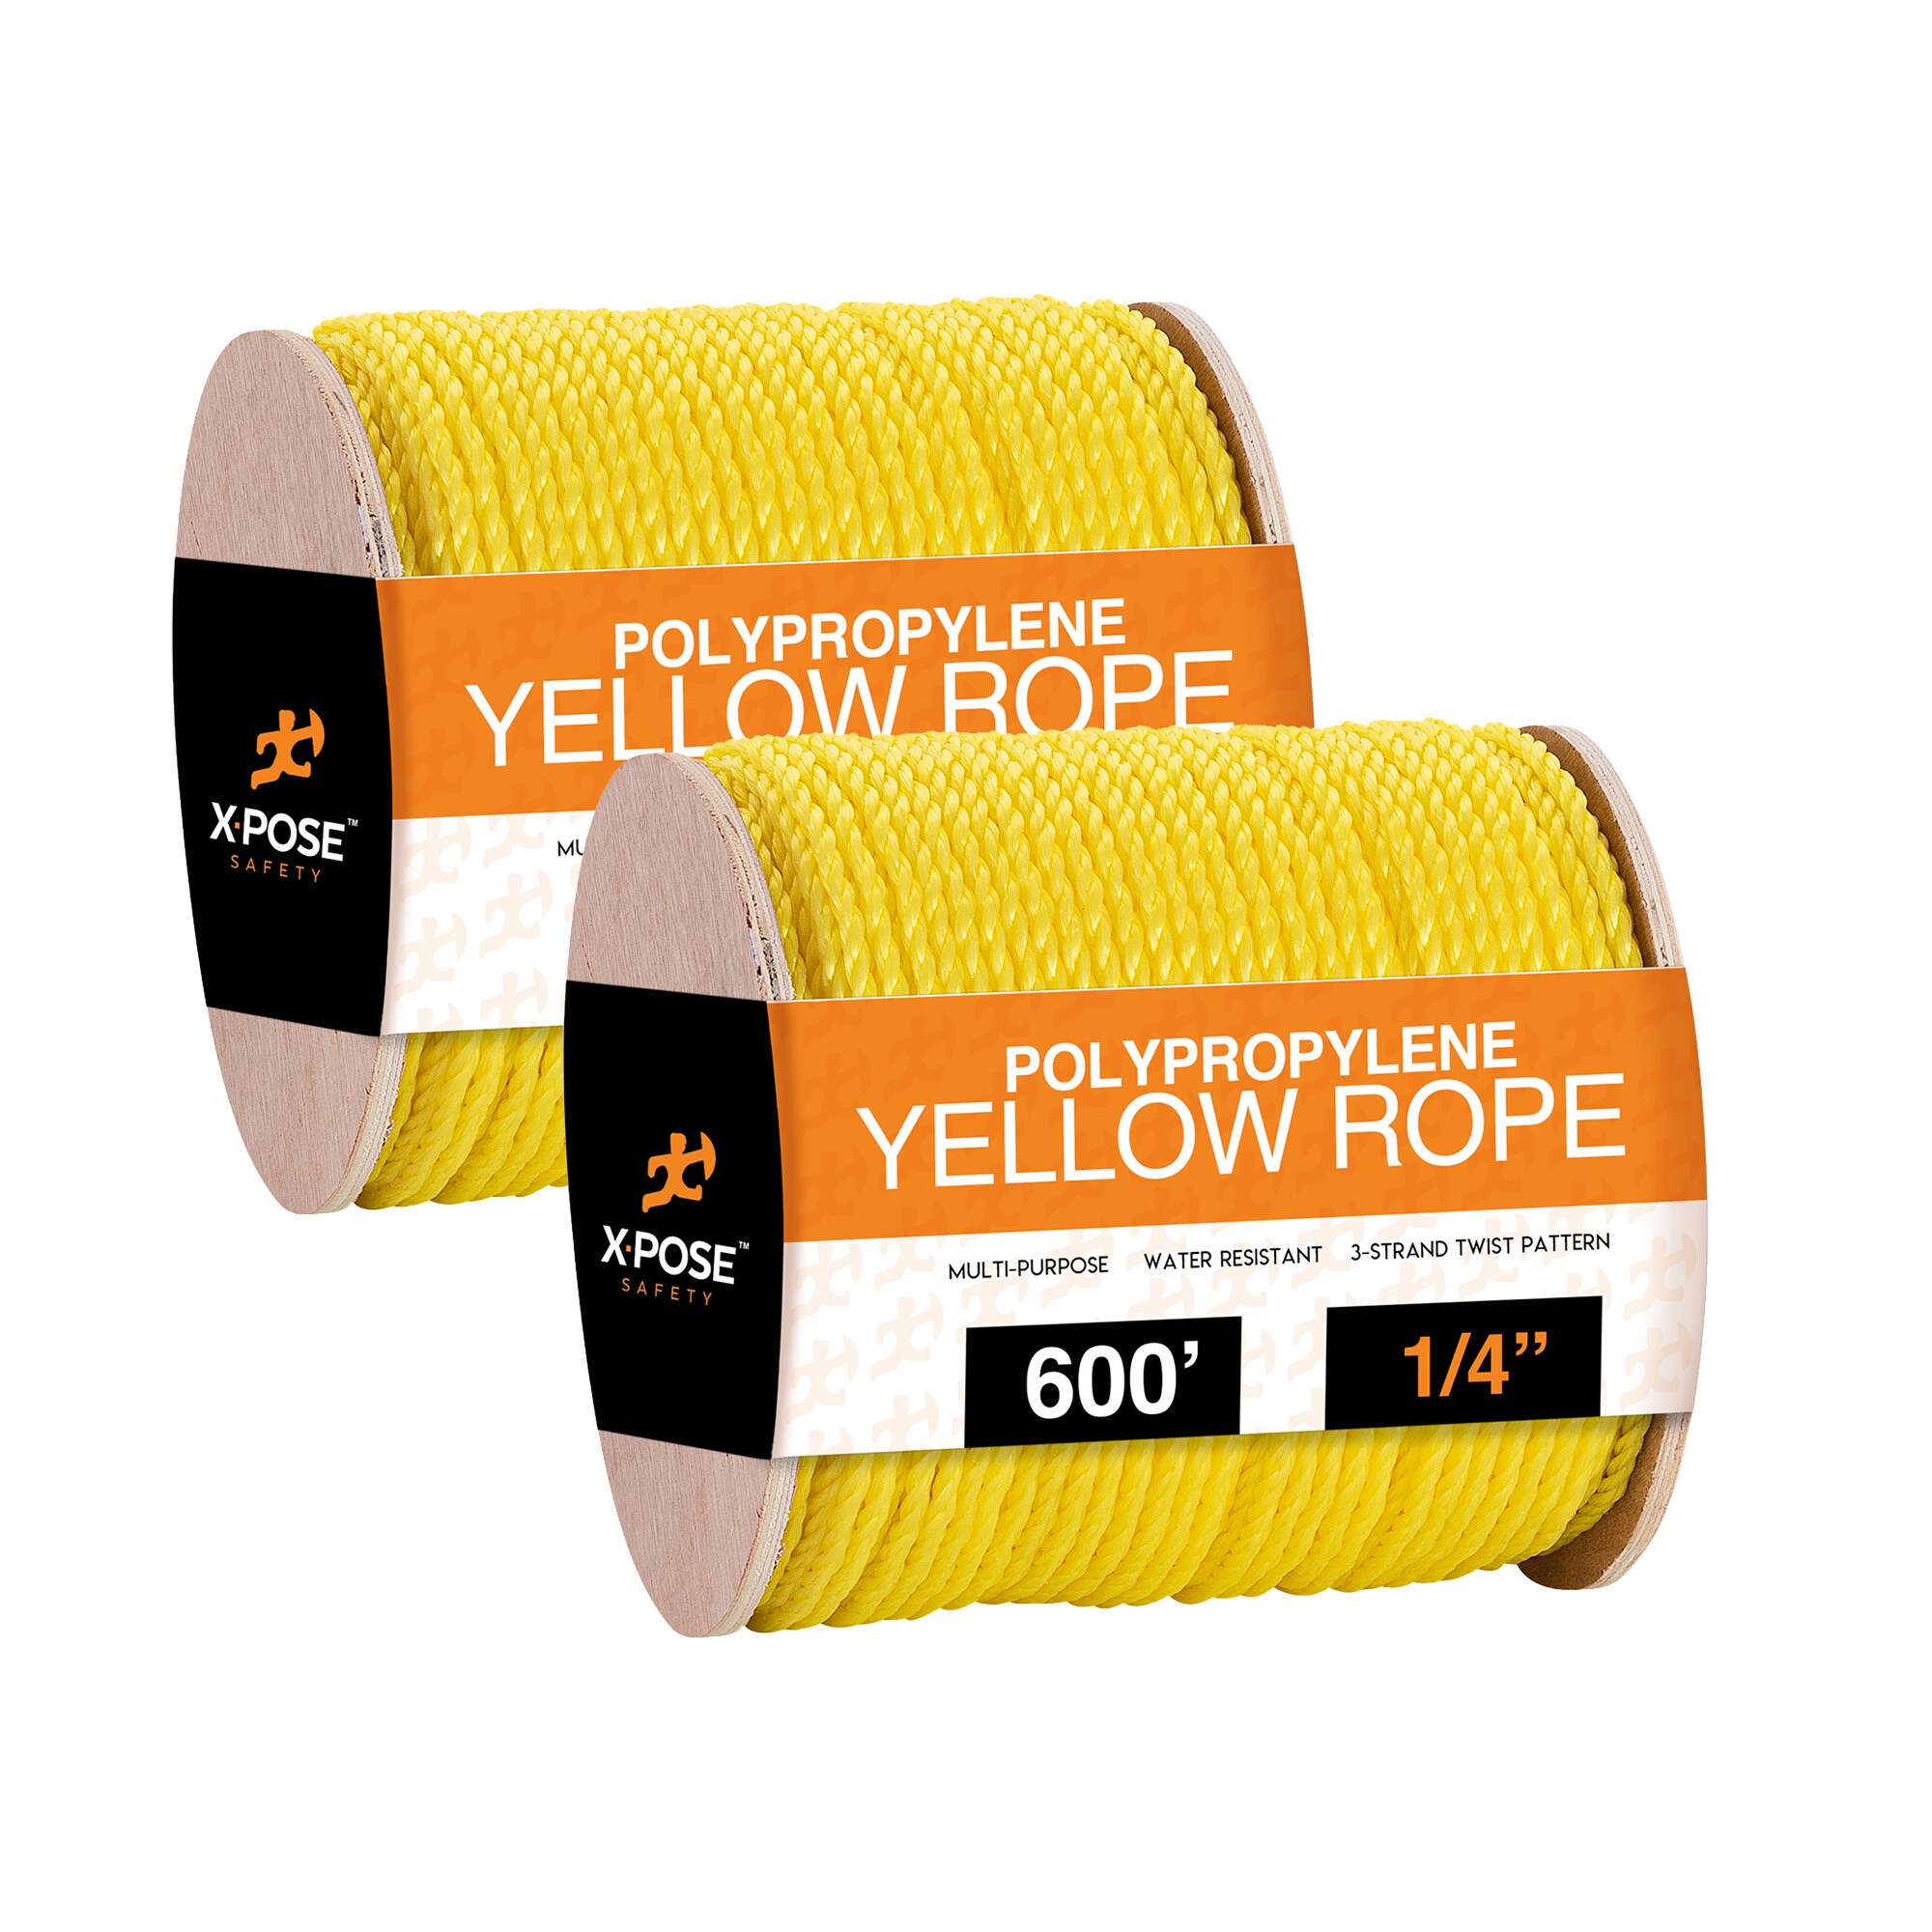 XPOSE SAFETY Yellow Twisted Polypropylene Rope - 1/4 Inch Floating Poly Pro  Cord 600 Ft - Resistant to Oil, Moisture, Marine Growth and Chemicals -  Reduced Slip, Easy Knot, Flexible - Pack